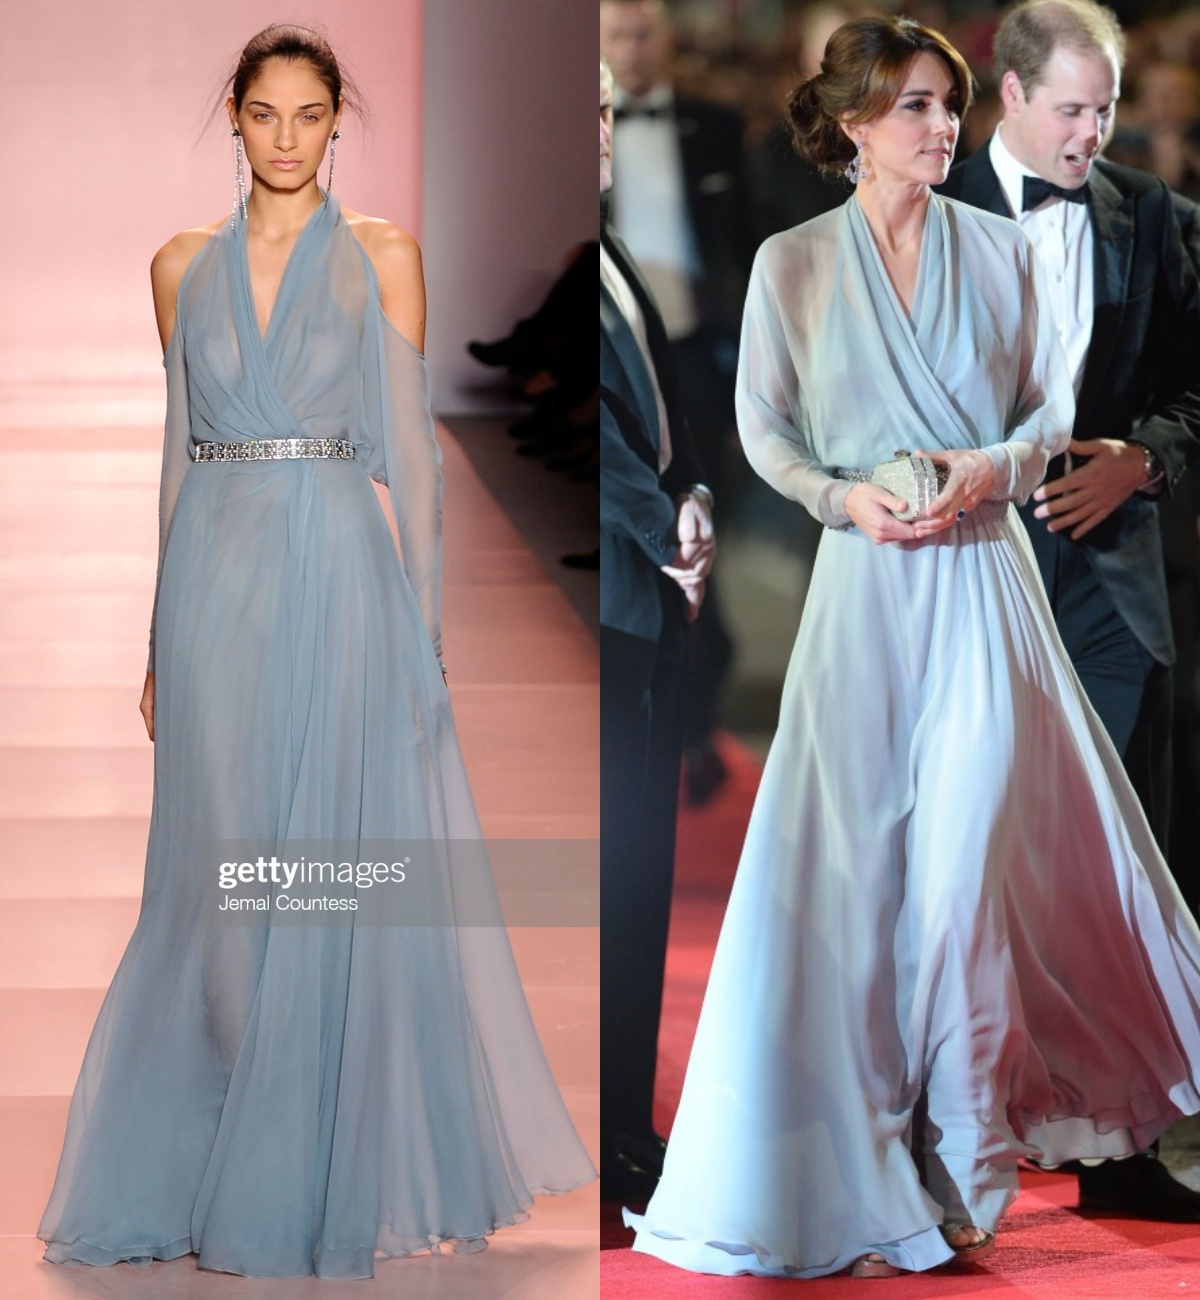 7 times Kate Middleton dresses better than the model, proving the temperament of the Royal Princess - Photo 5.